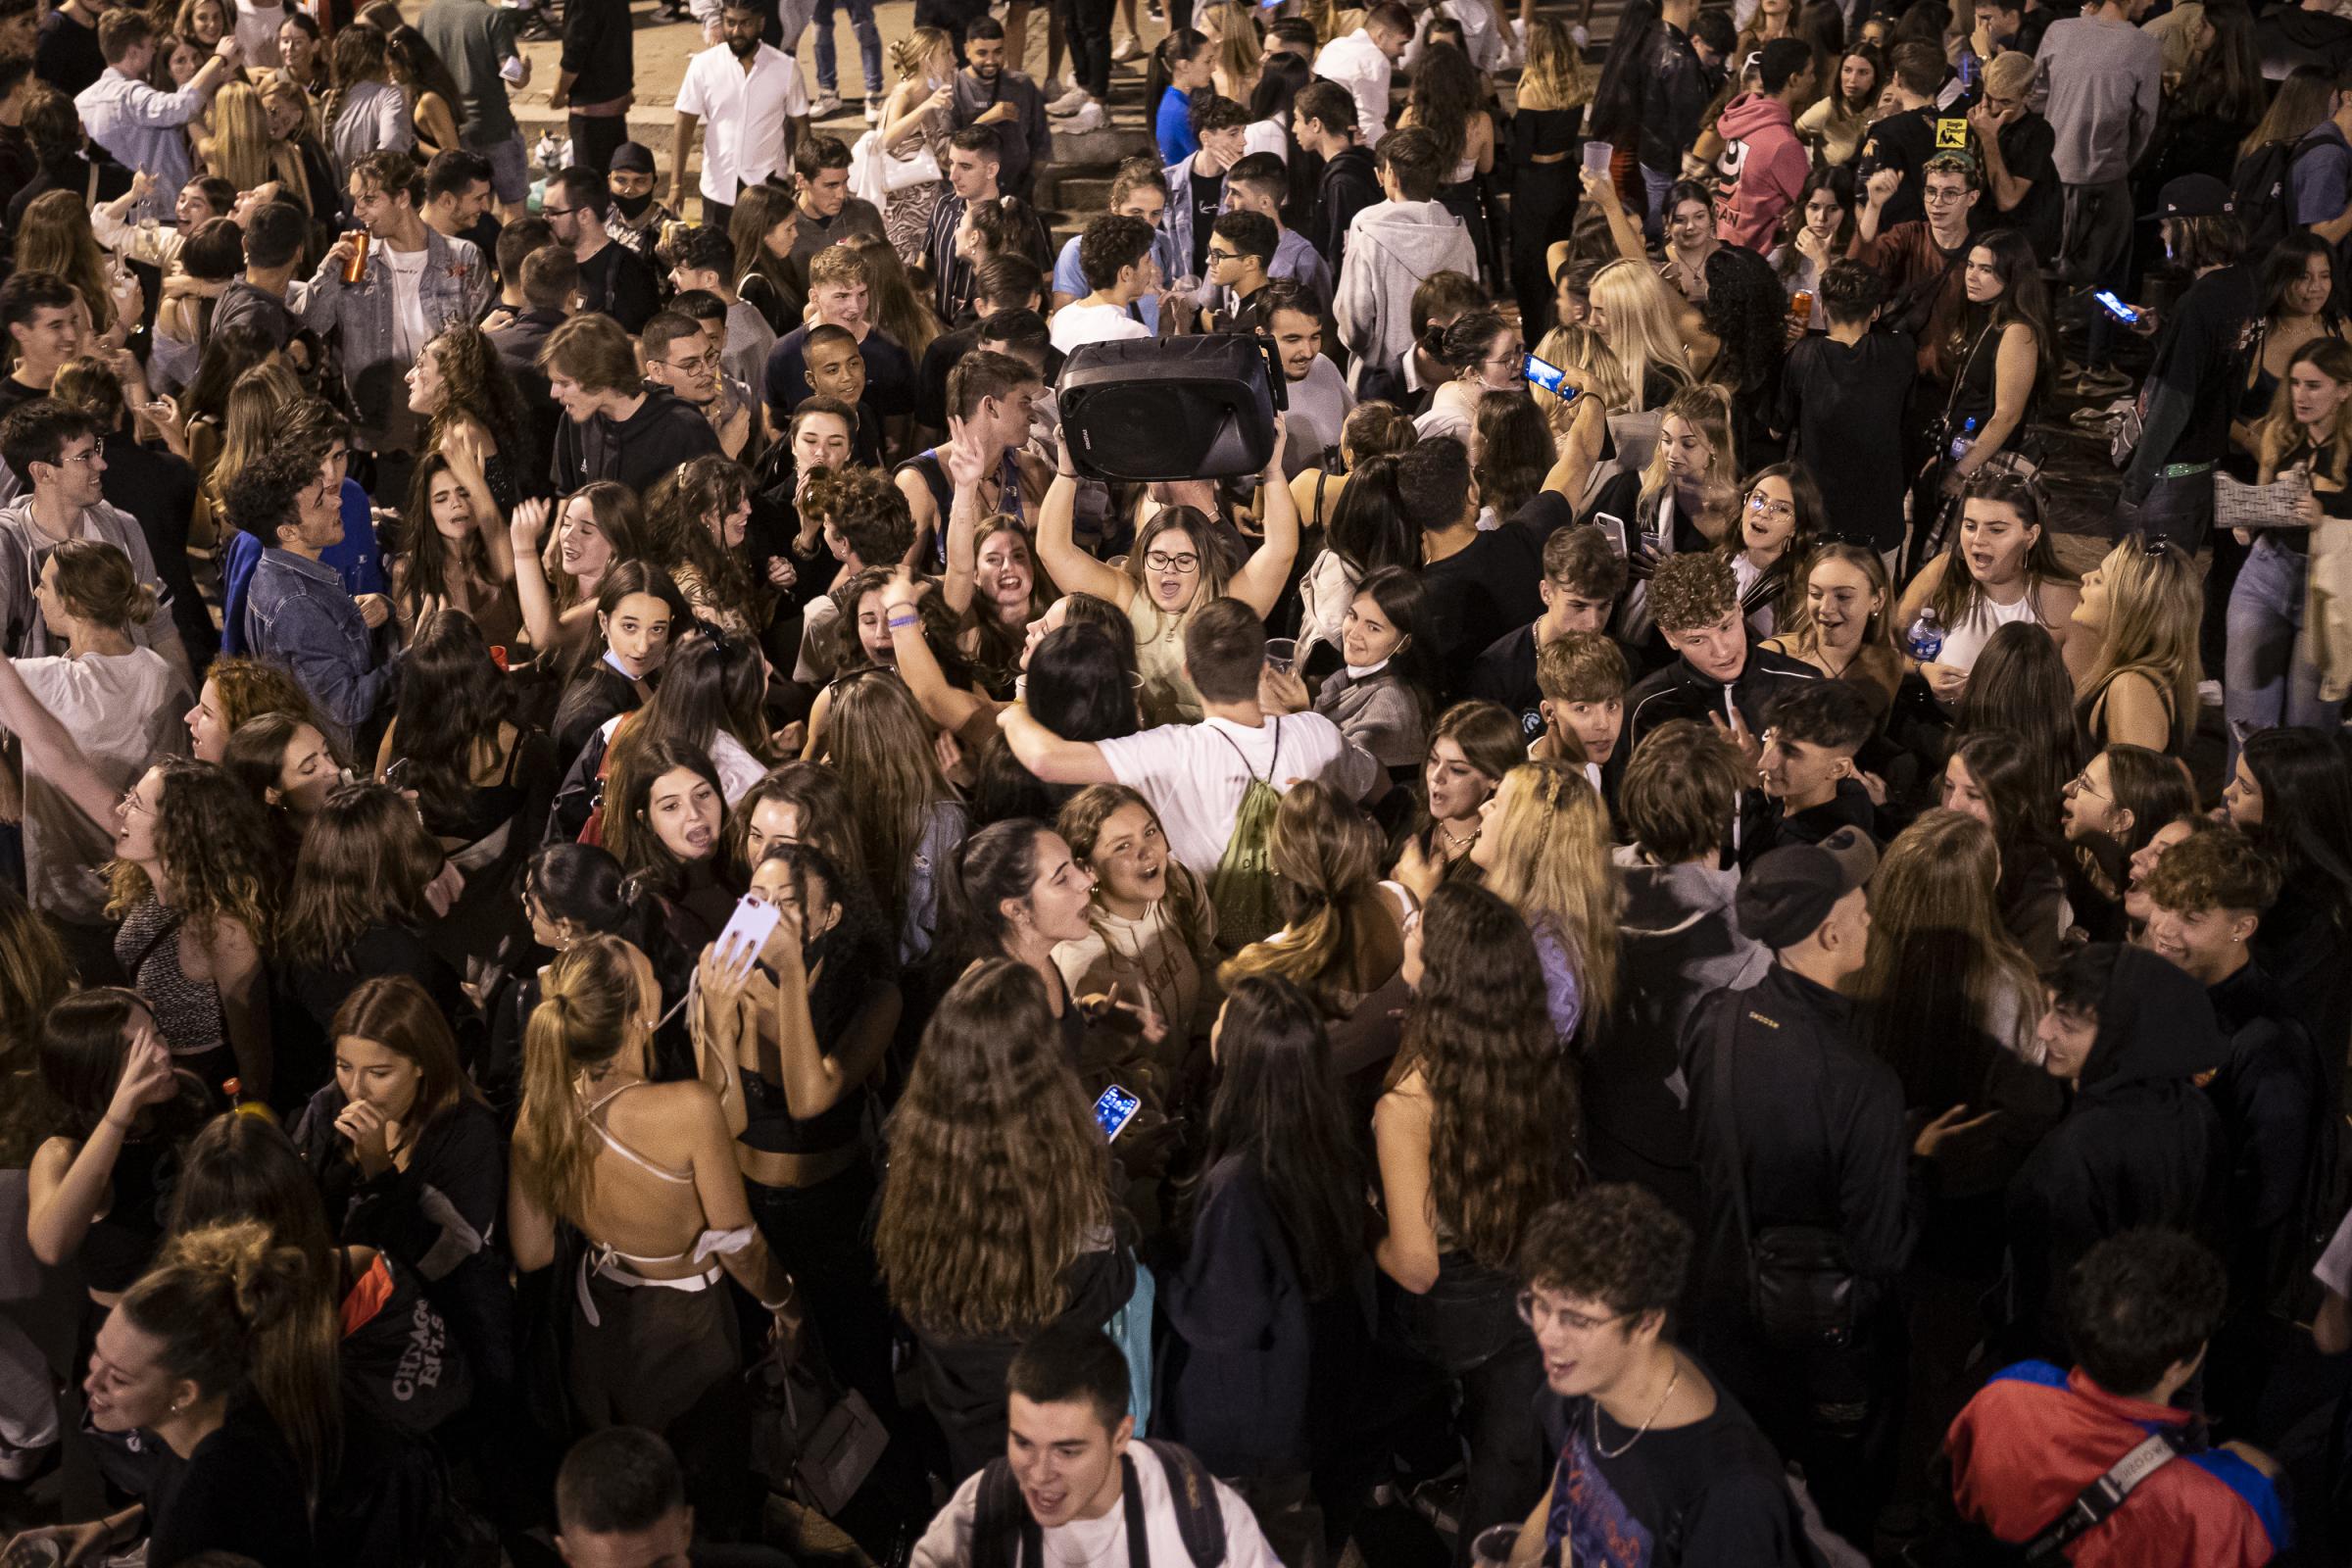 The Mercè's massive boozings: images of the incidents in Barcelona